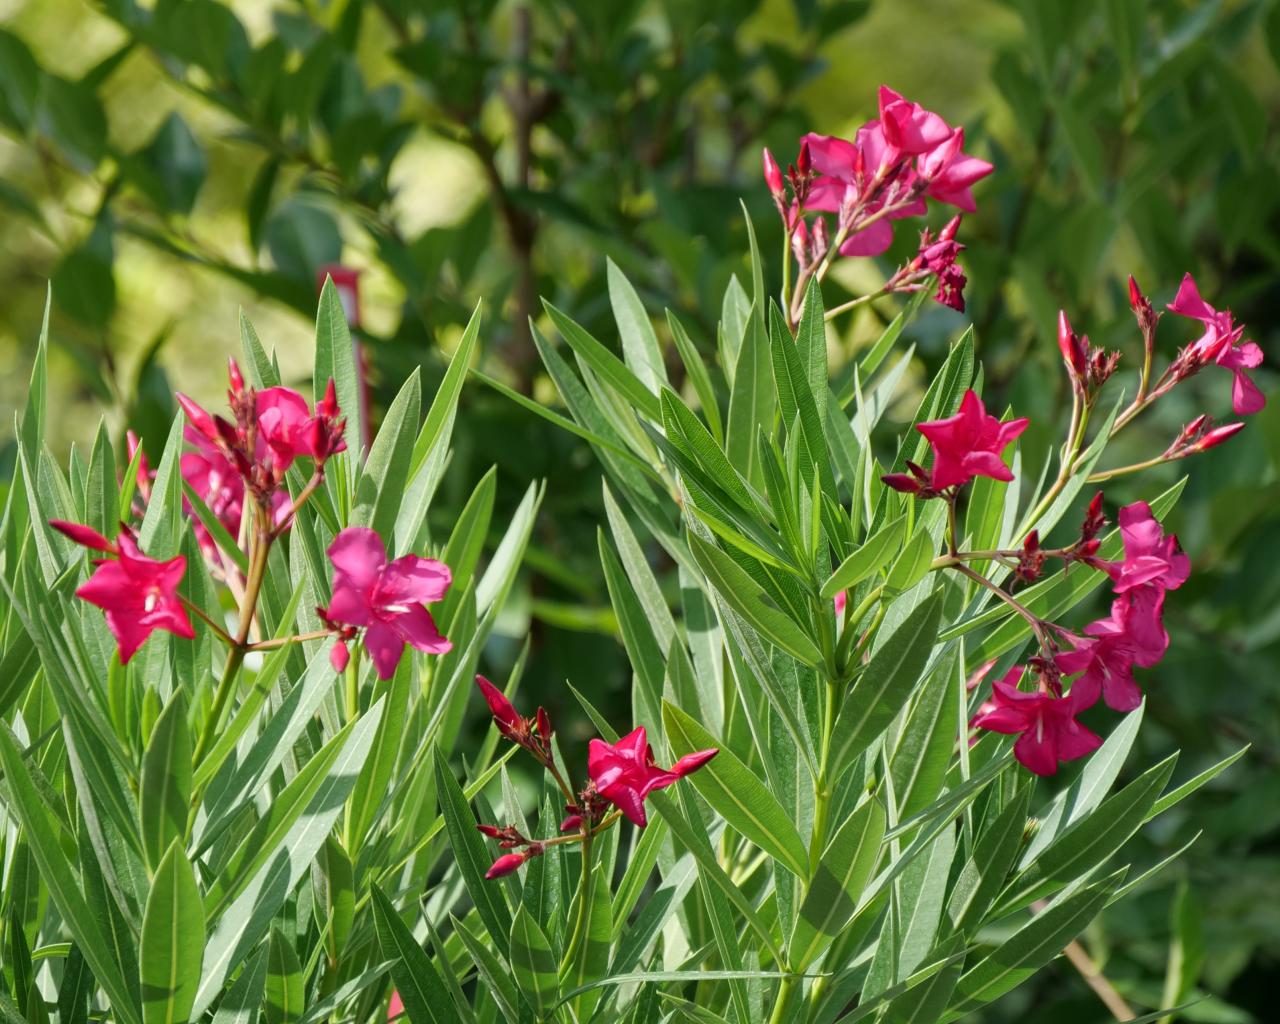 Oleander Is a Beautiful But Poisonous Shrub   HGTV